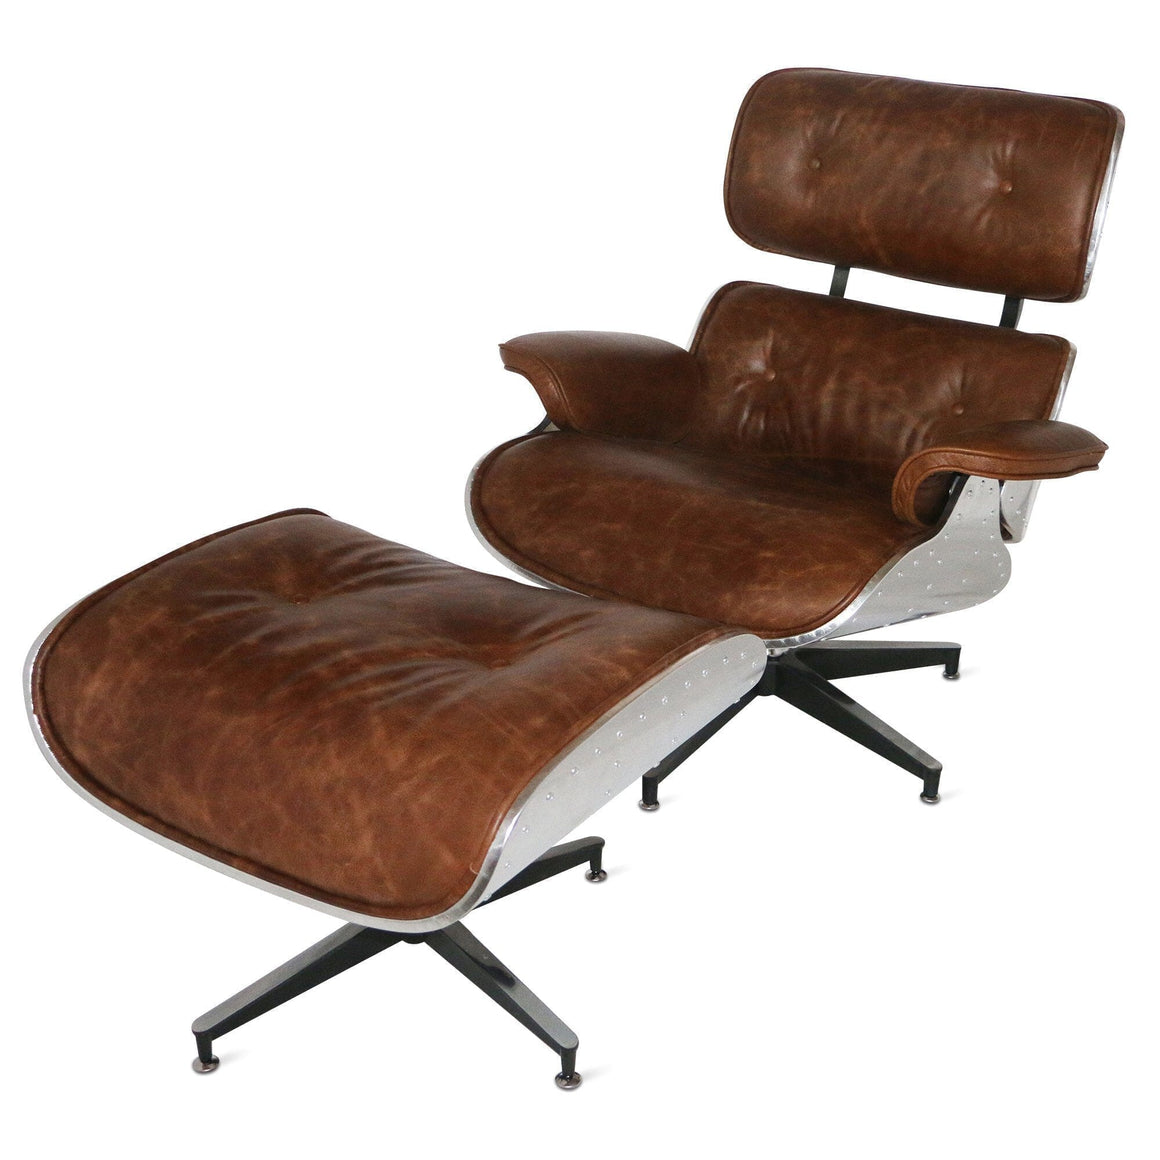 Aviator Mid-Century Modern Lounge Chair and Ottoman - Rustic Deco Incorporated